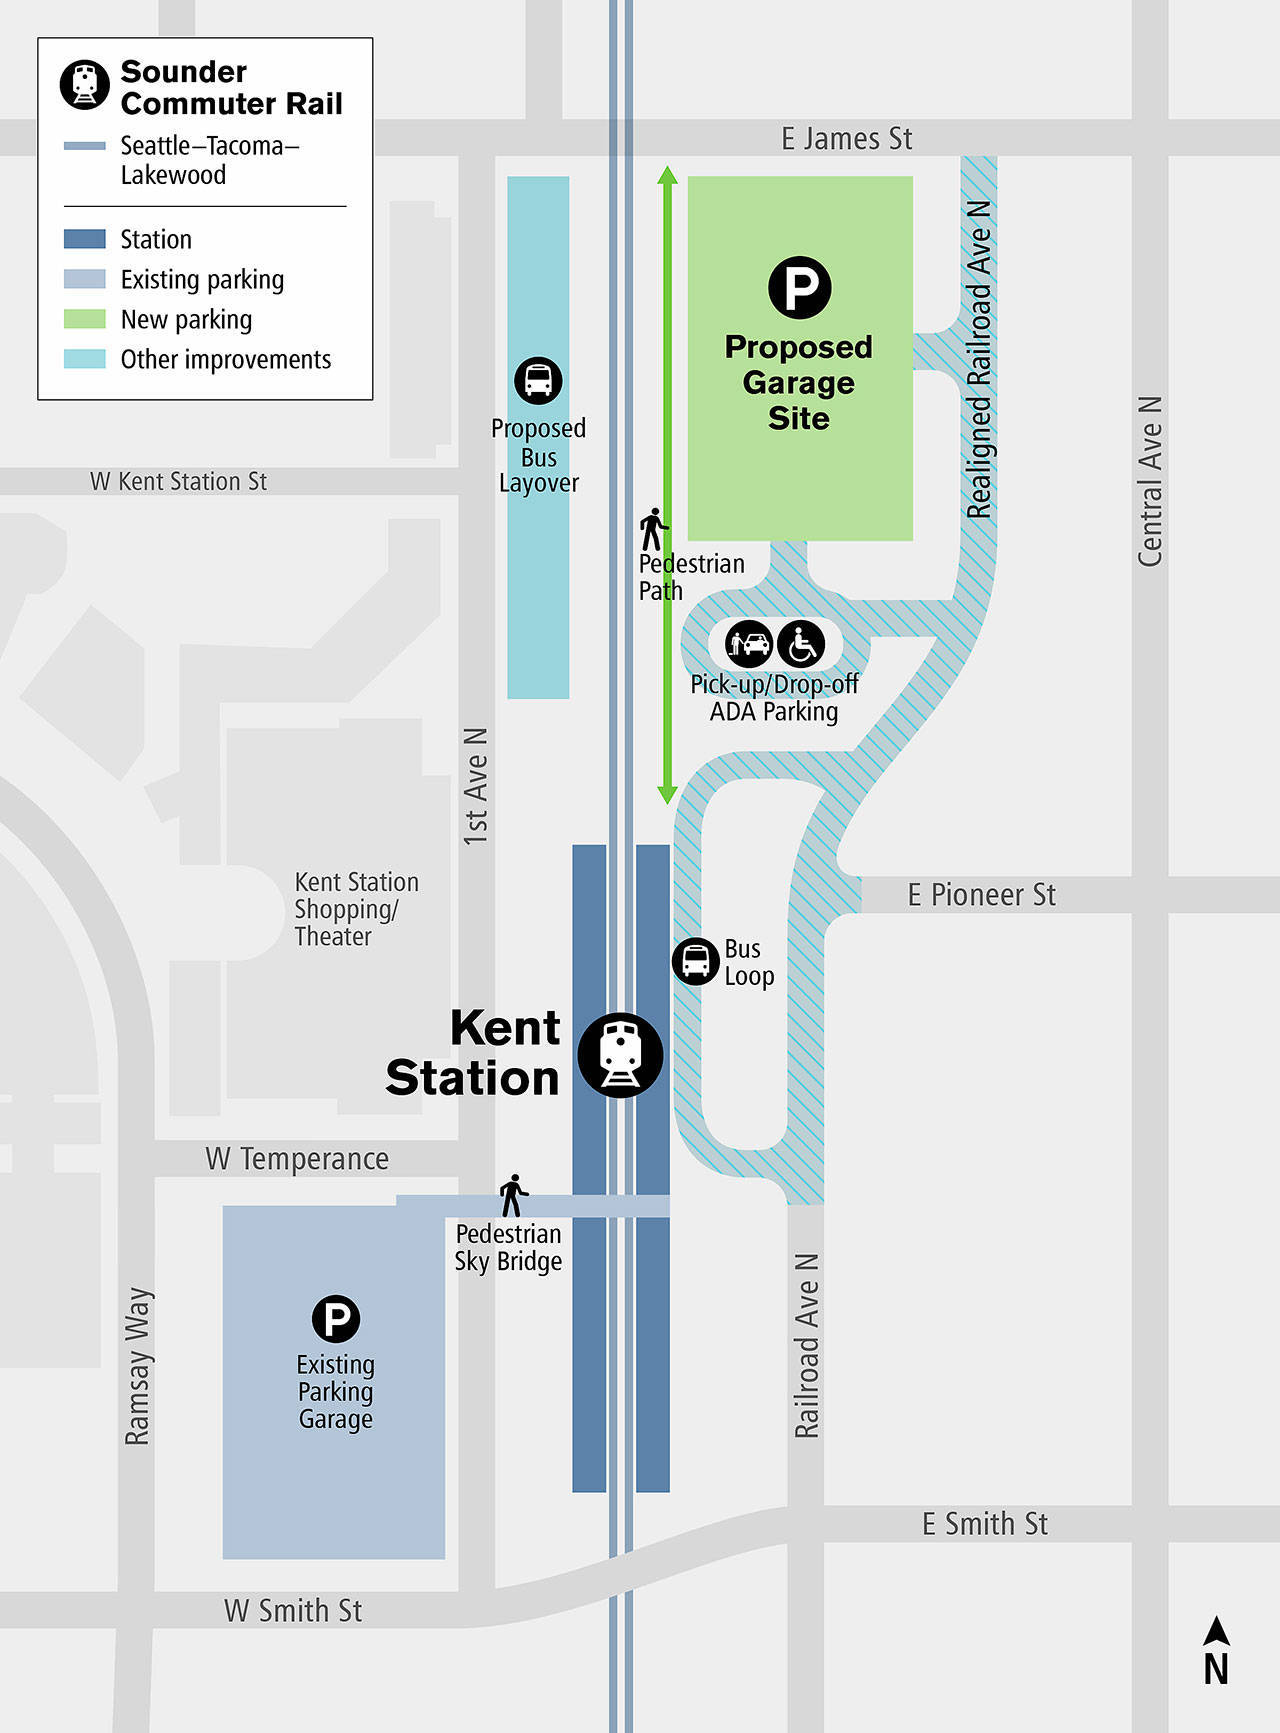 Sound Transit has paused plans for a new Sounder parking garage for train commuters in Kent. COURTESY GRAPHIC, Sound Transit